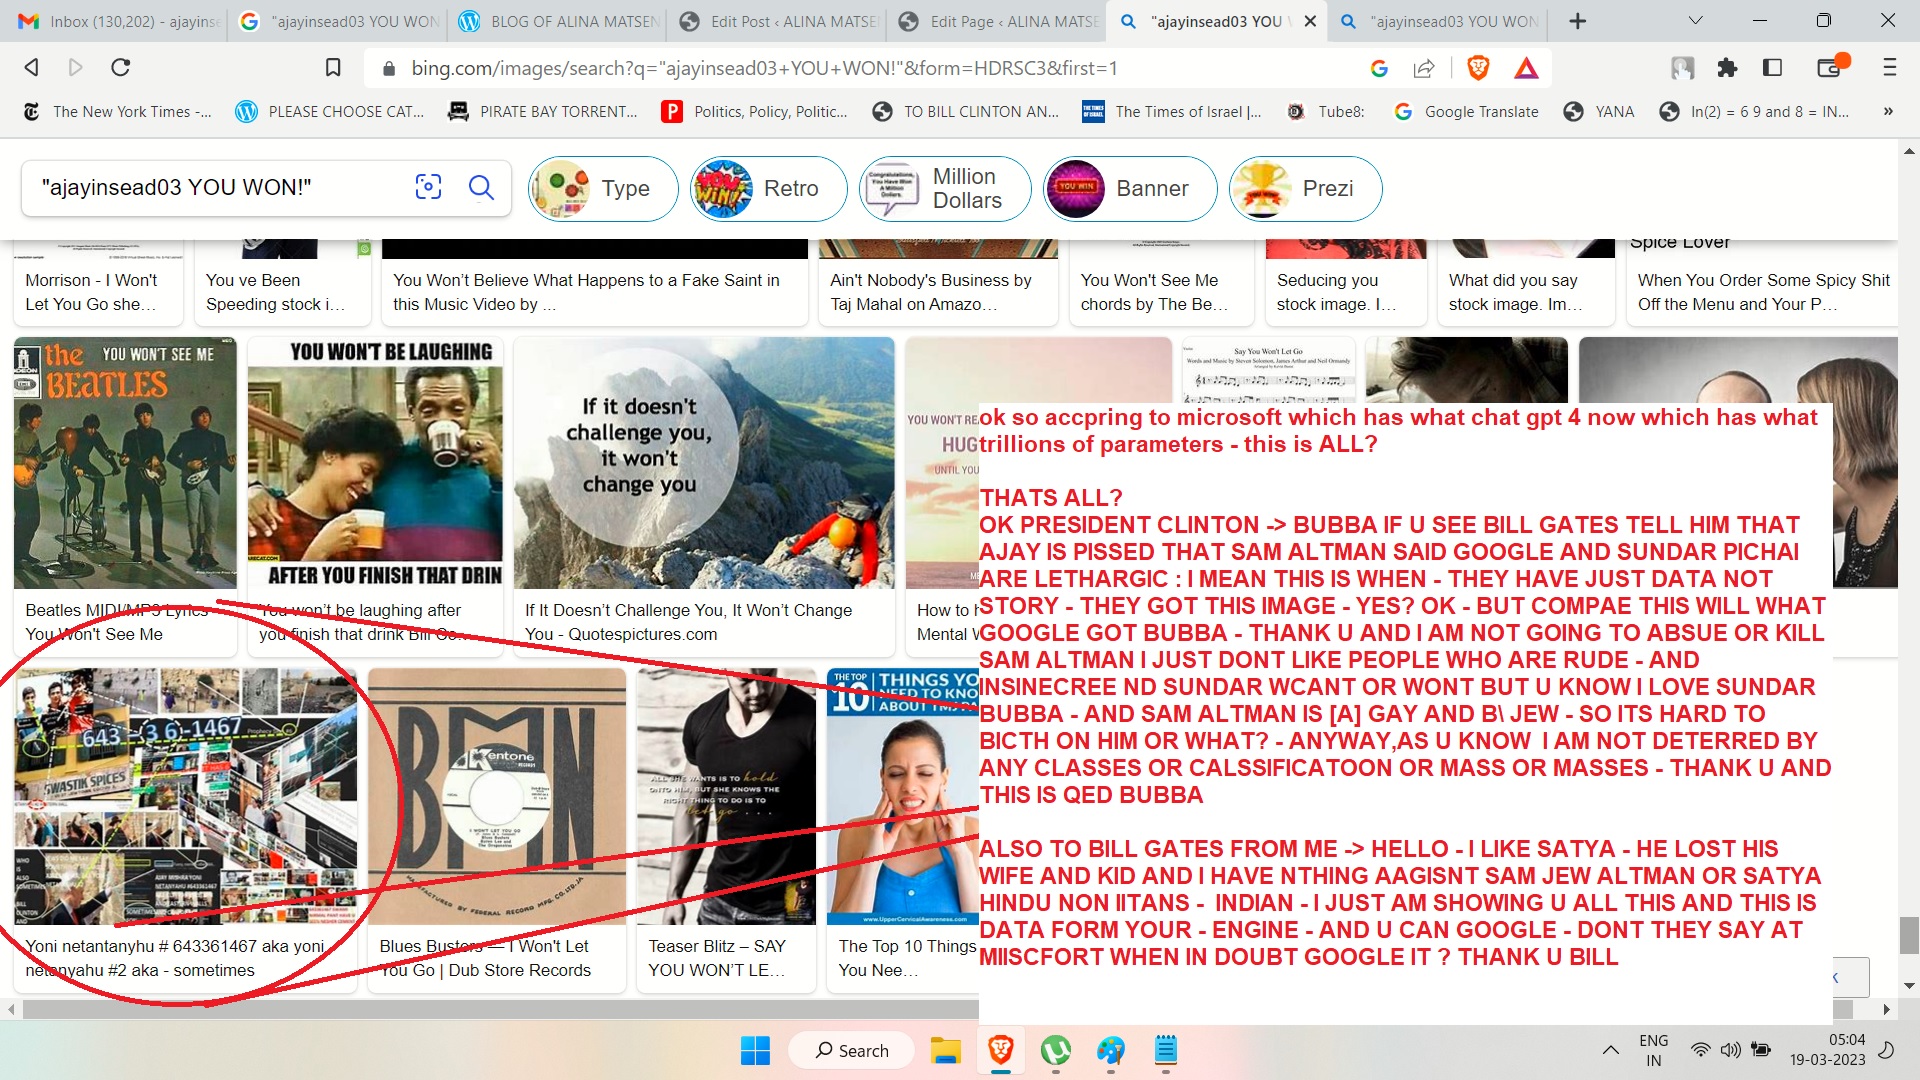 microsfot bing vs google - see ajayinsead 03 you havae won results and compare and contarst oh wow harry potter girl -- HELLO SUNDAR